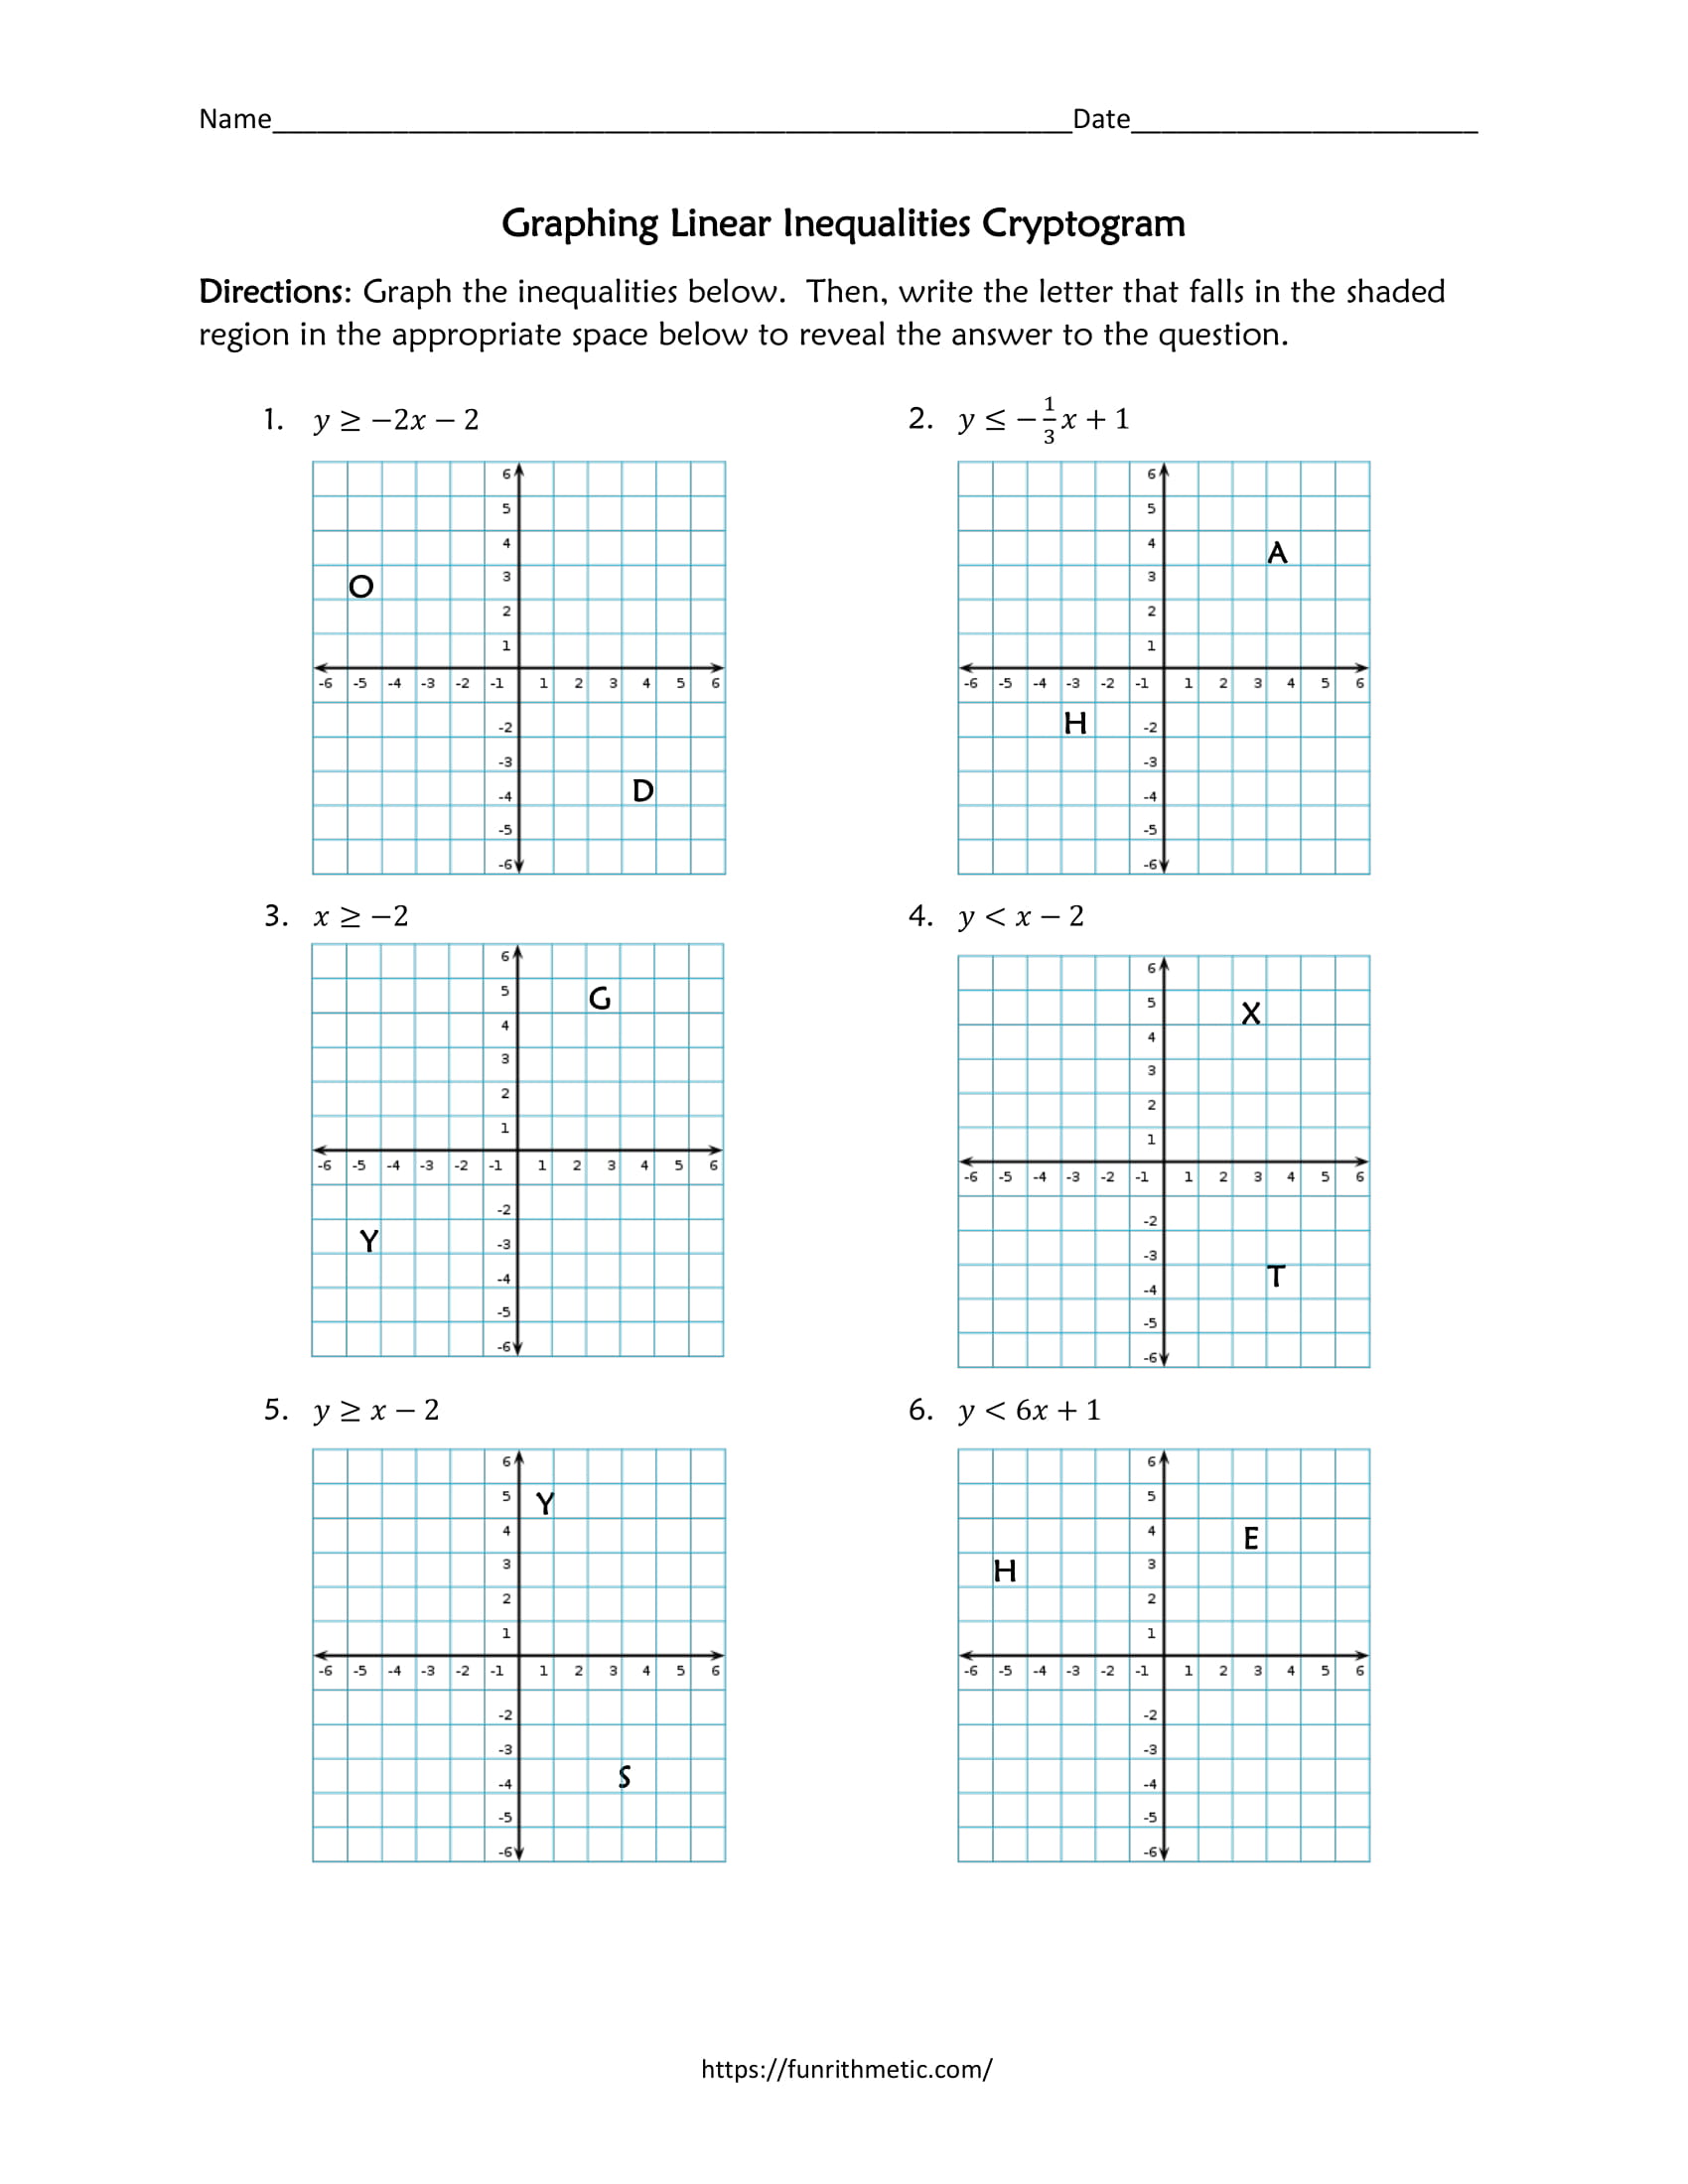 Graphing Linear Inequalities Cryptogram Worksheet Regarding Graphing Linear Inequalities Worksheet